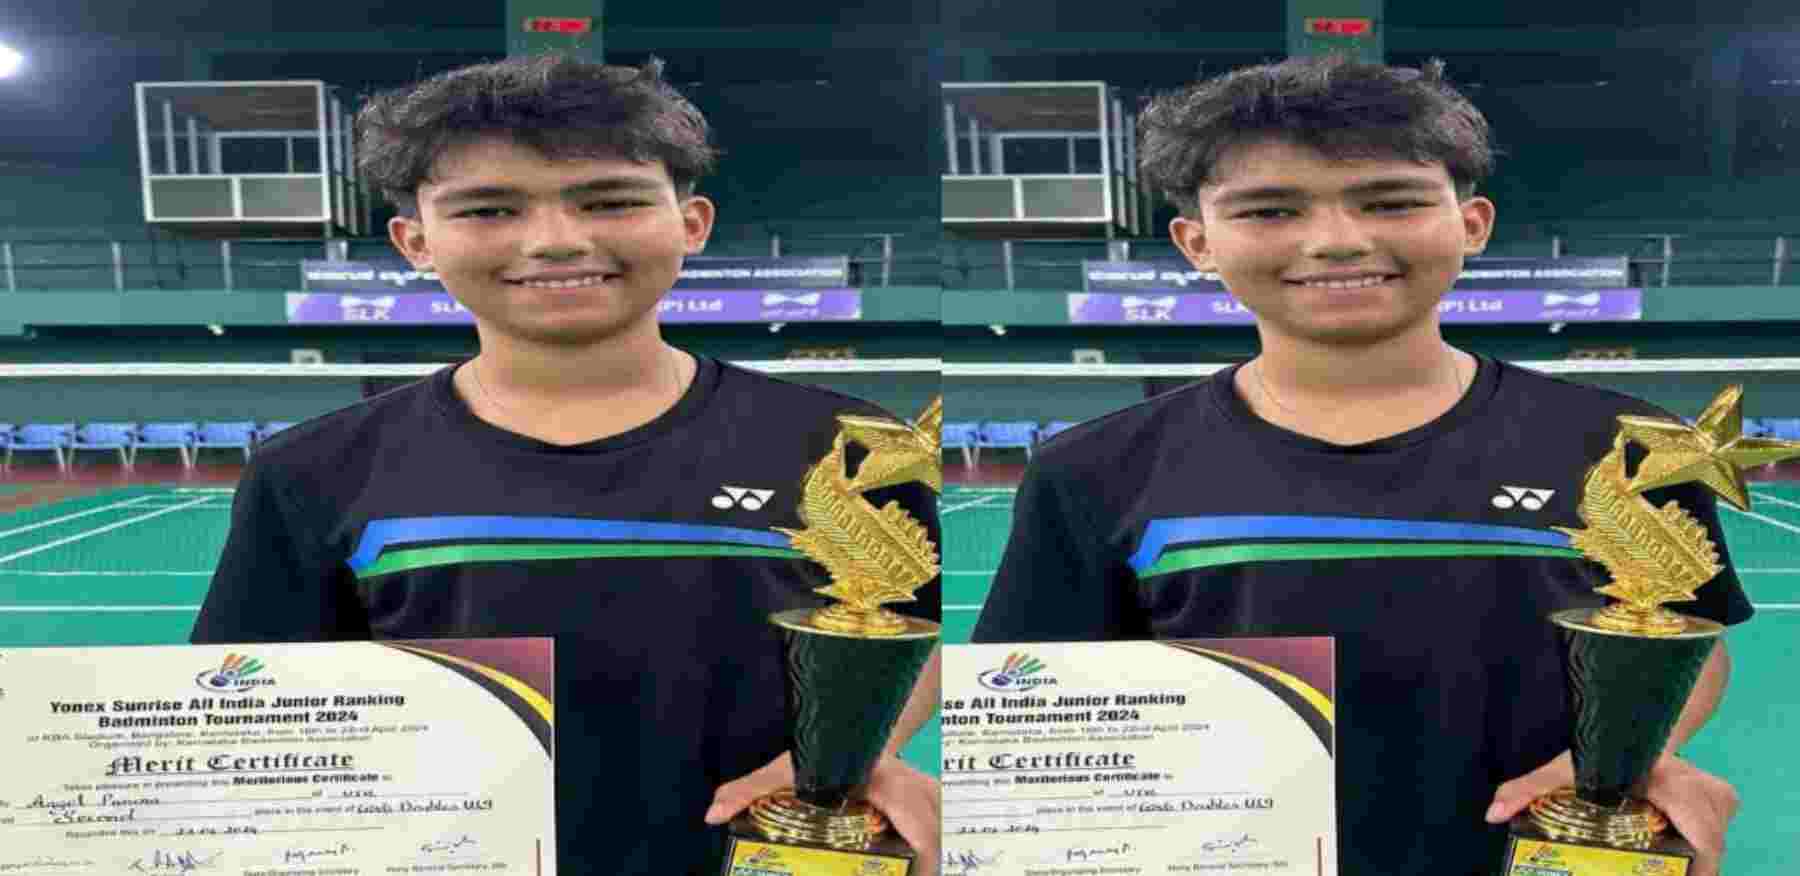 Uttarakhand news:Angel Punera of Pithoragarh won silver medal in All India Badminton Competition